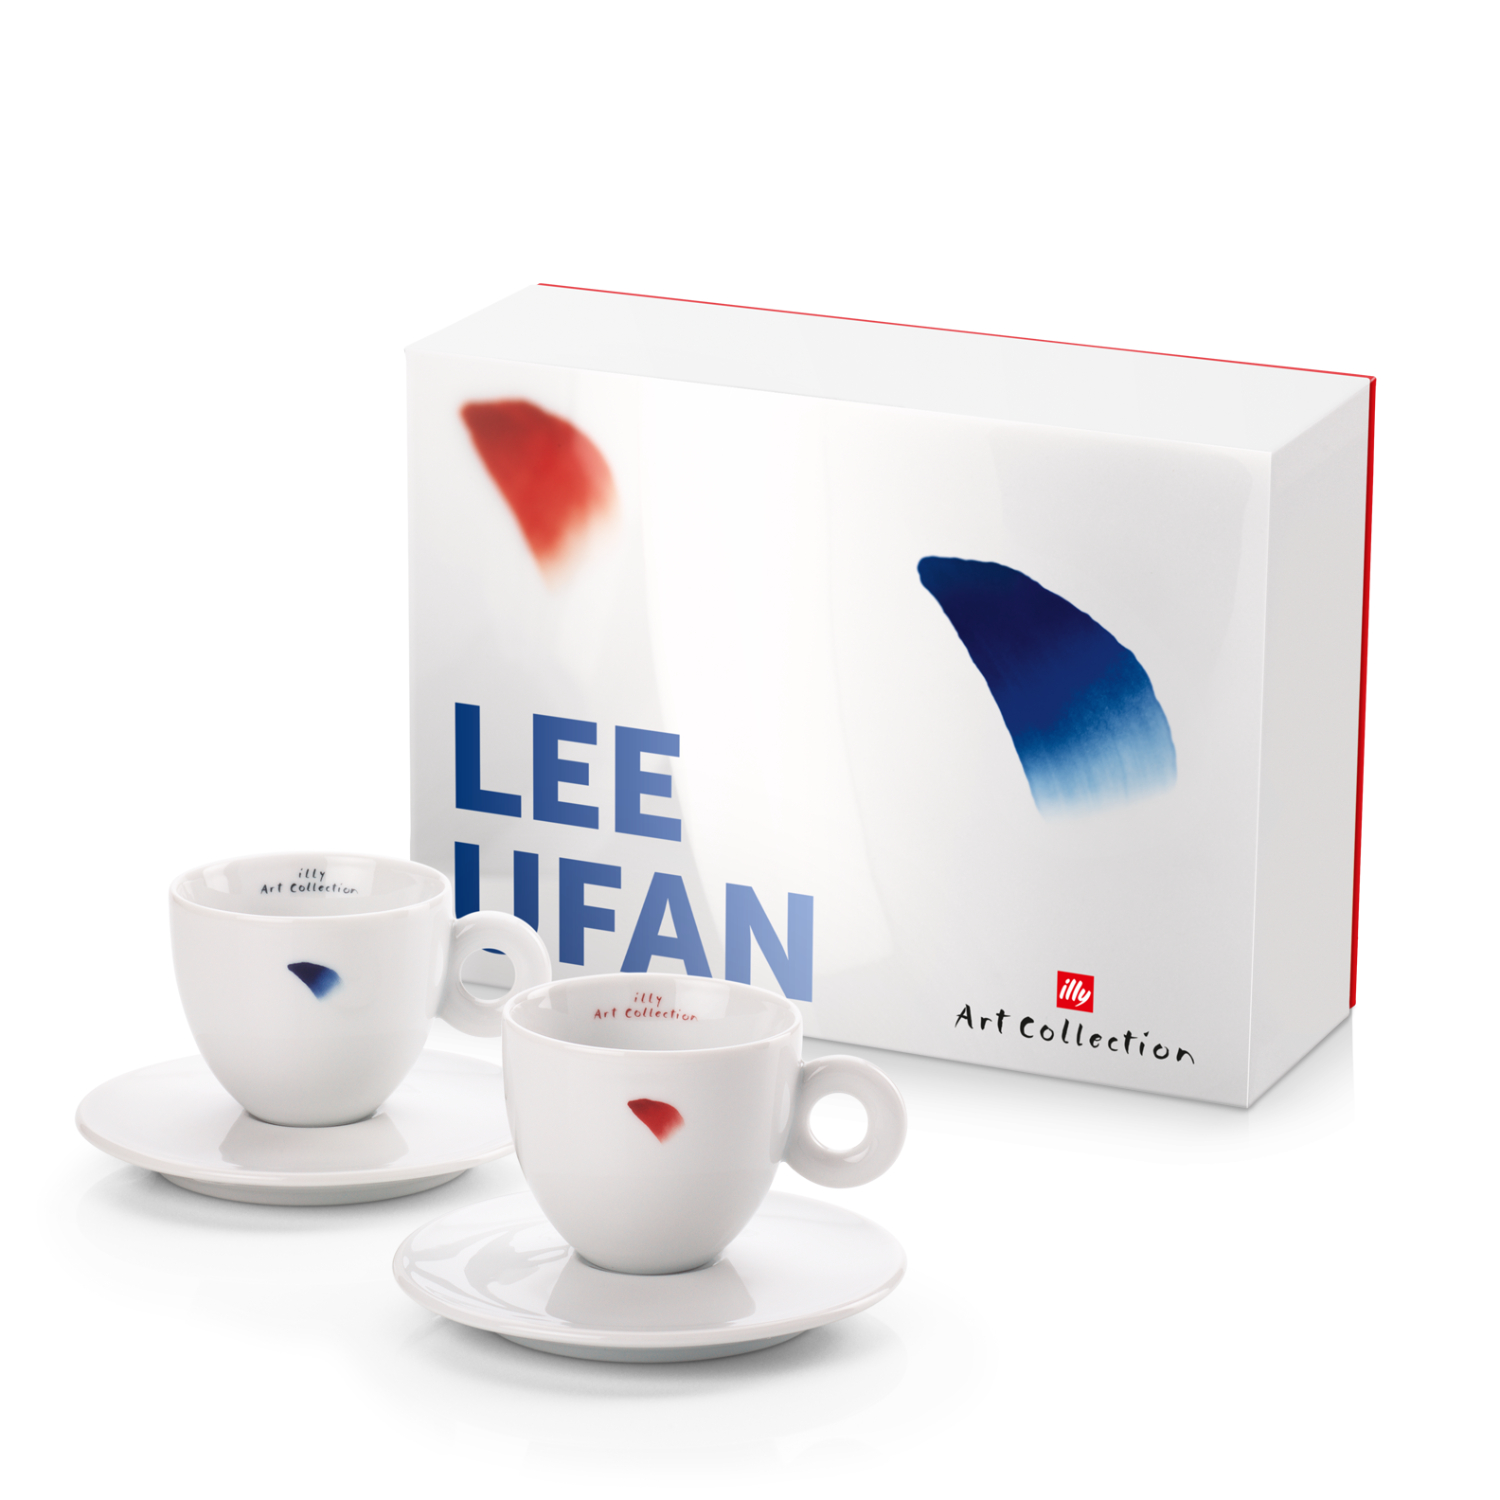 illy Art Collection LEE UFAN Gift Set 2 Cappuccino Cups, Cups, 02-02-2018